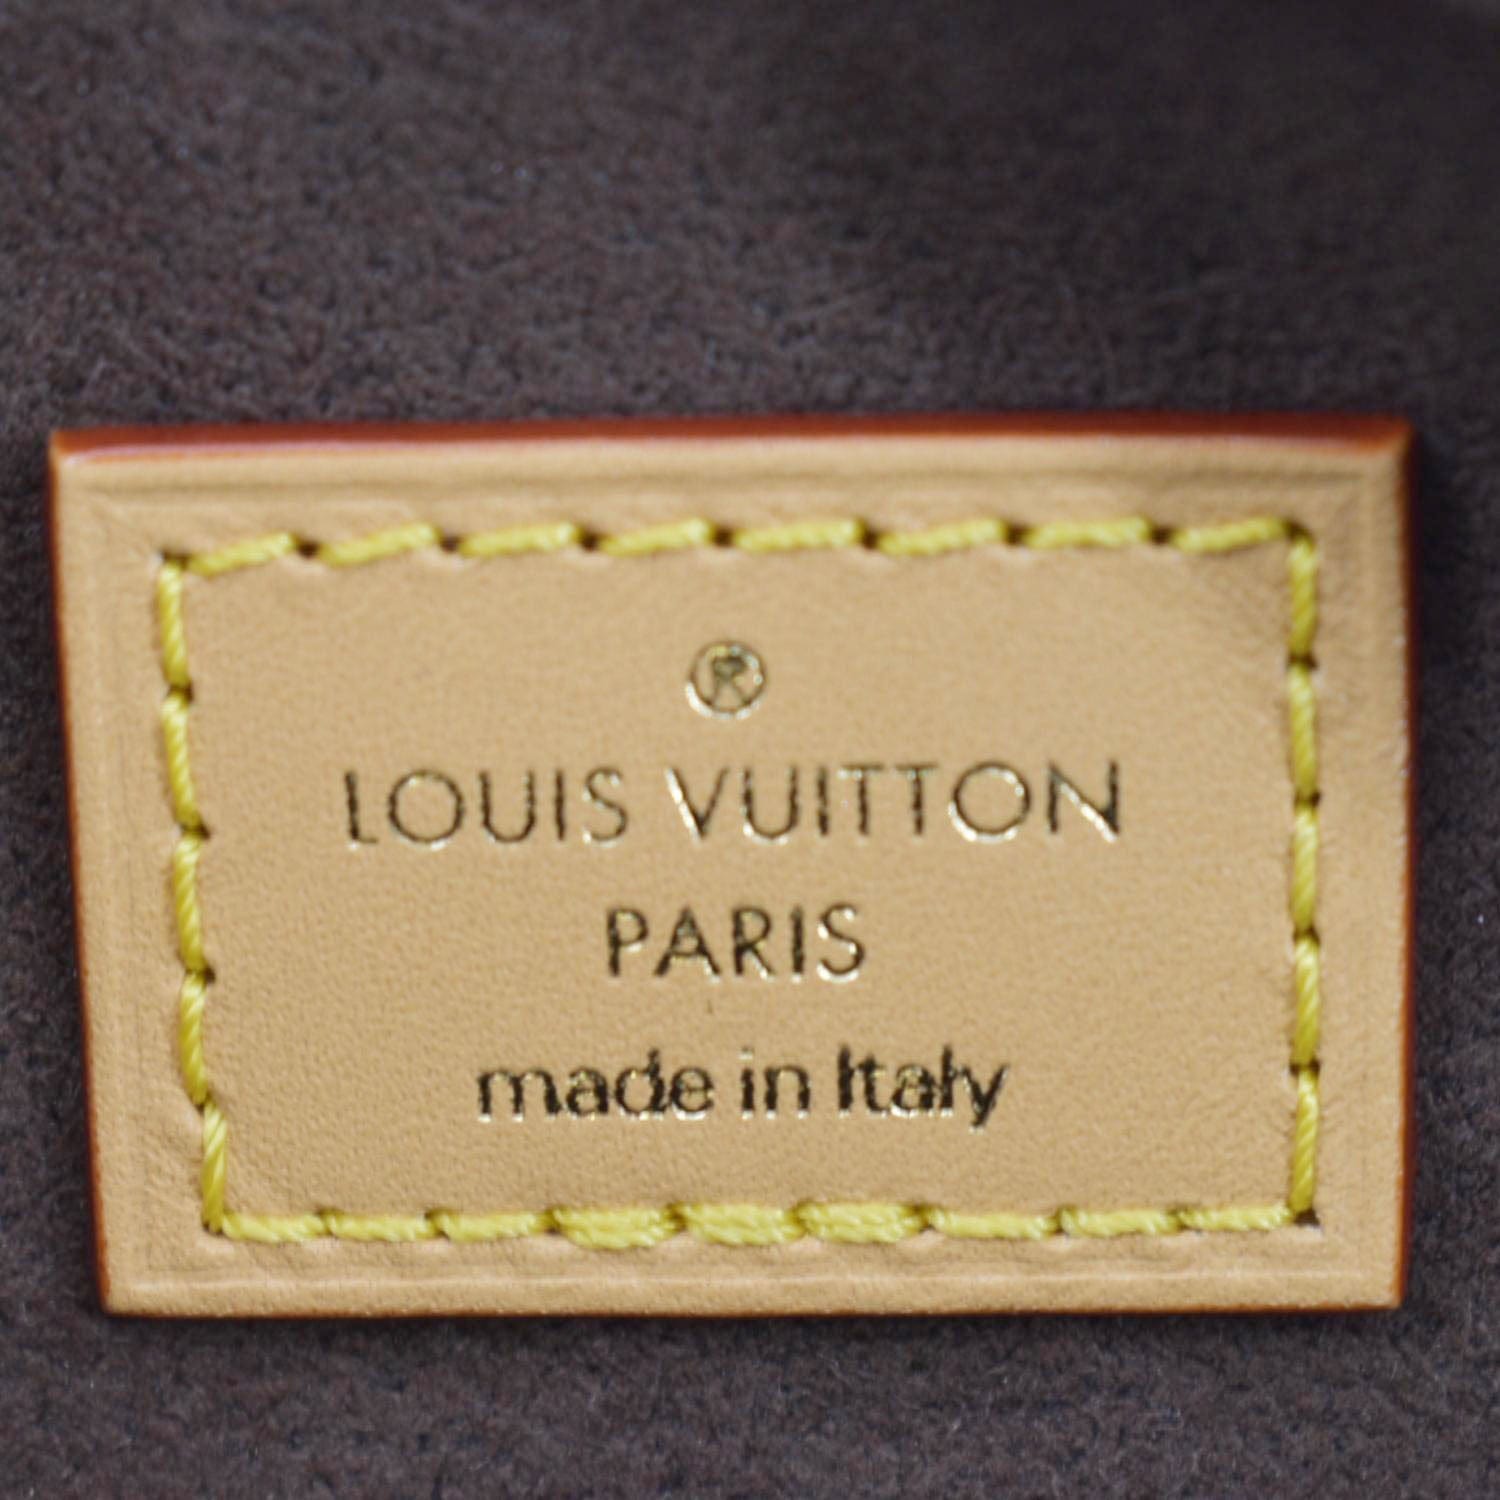 Anything for fashion: The miniature Louis Vuitton bag, created by